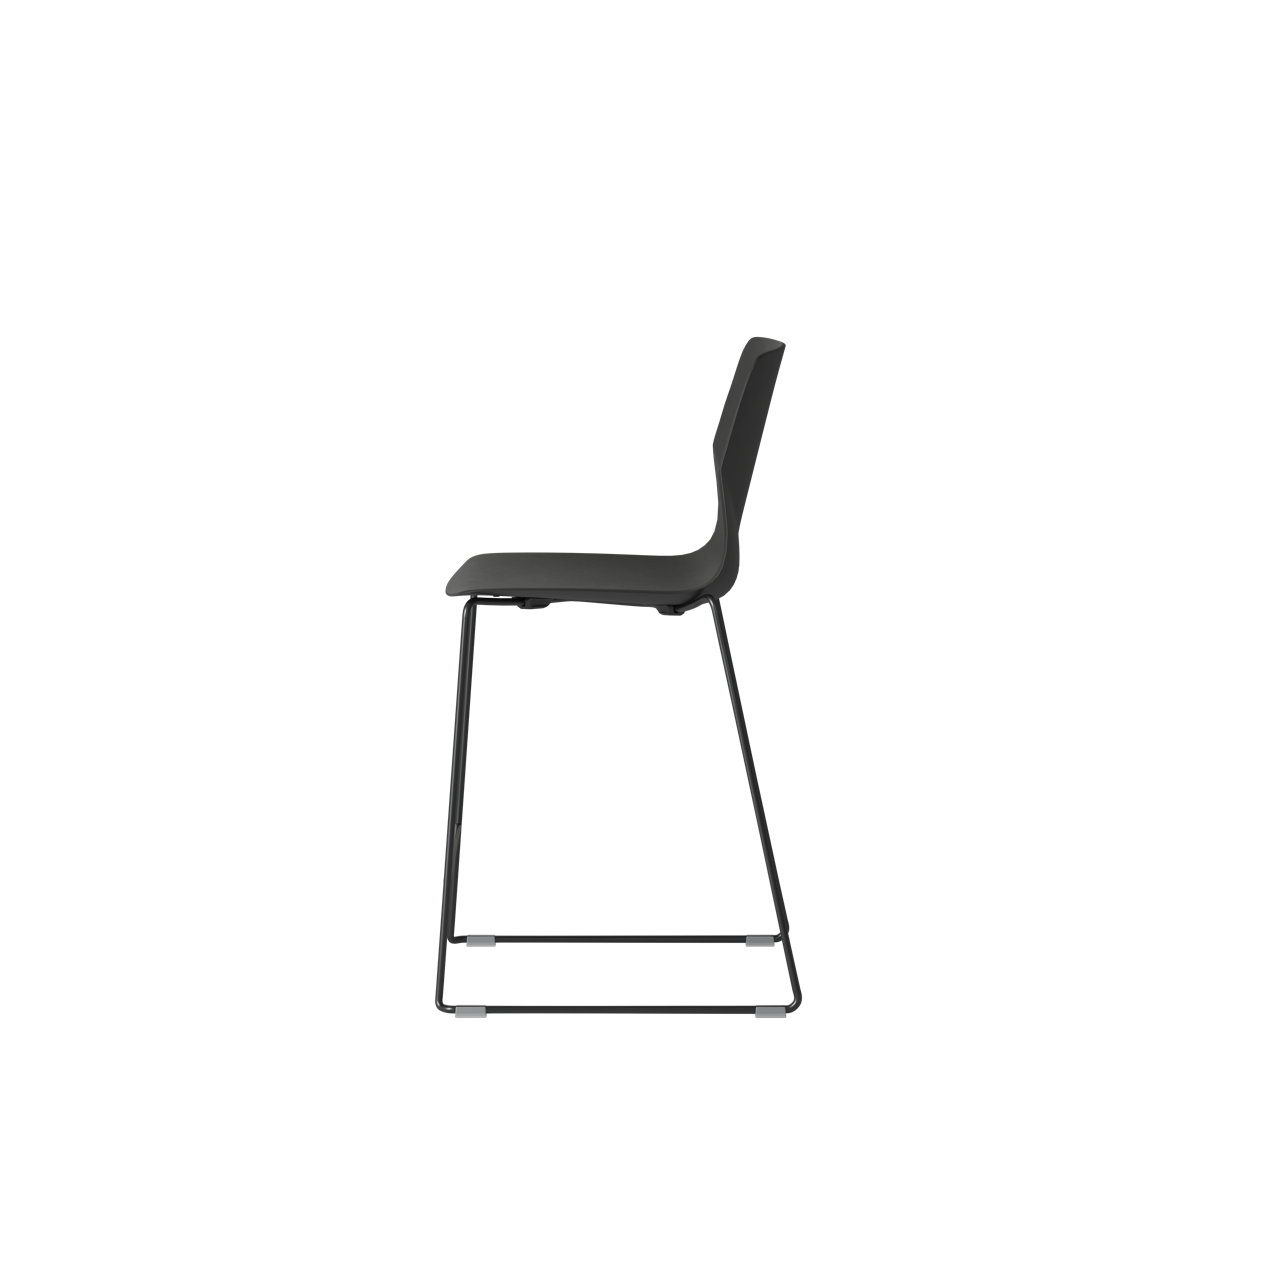 OCEE&FOUR – Chairs – FourSure 90 – Plastic shell - Skid Frame - Packshot Image 5 Large